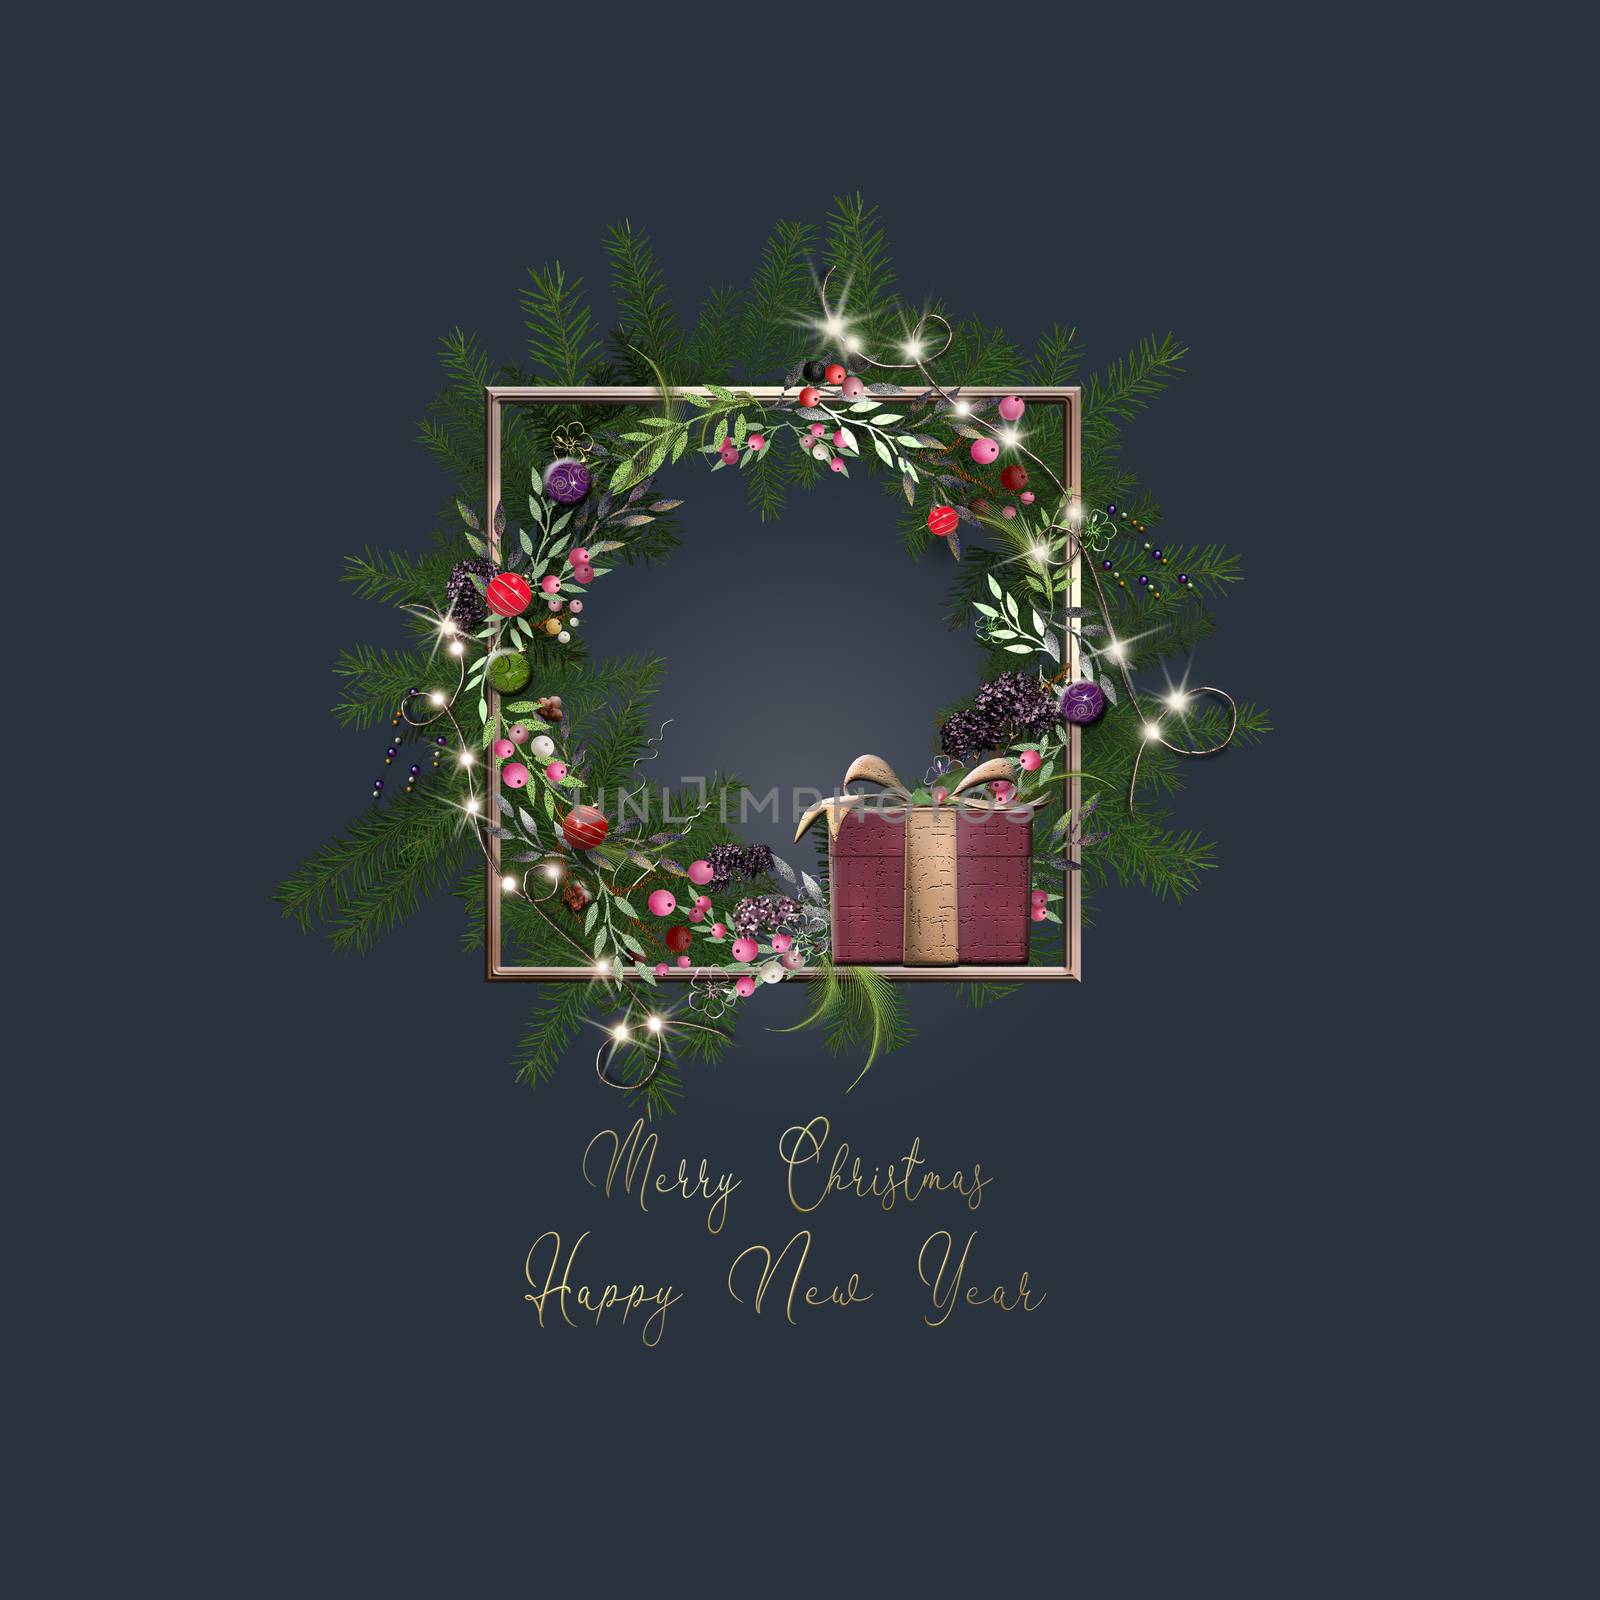 Merry Christmas Happy New Year card by NelliPolk